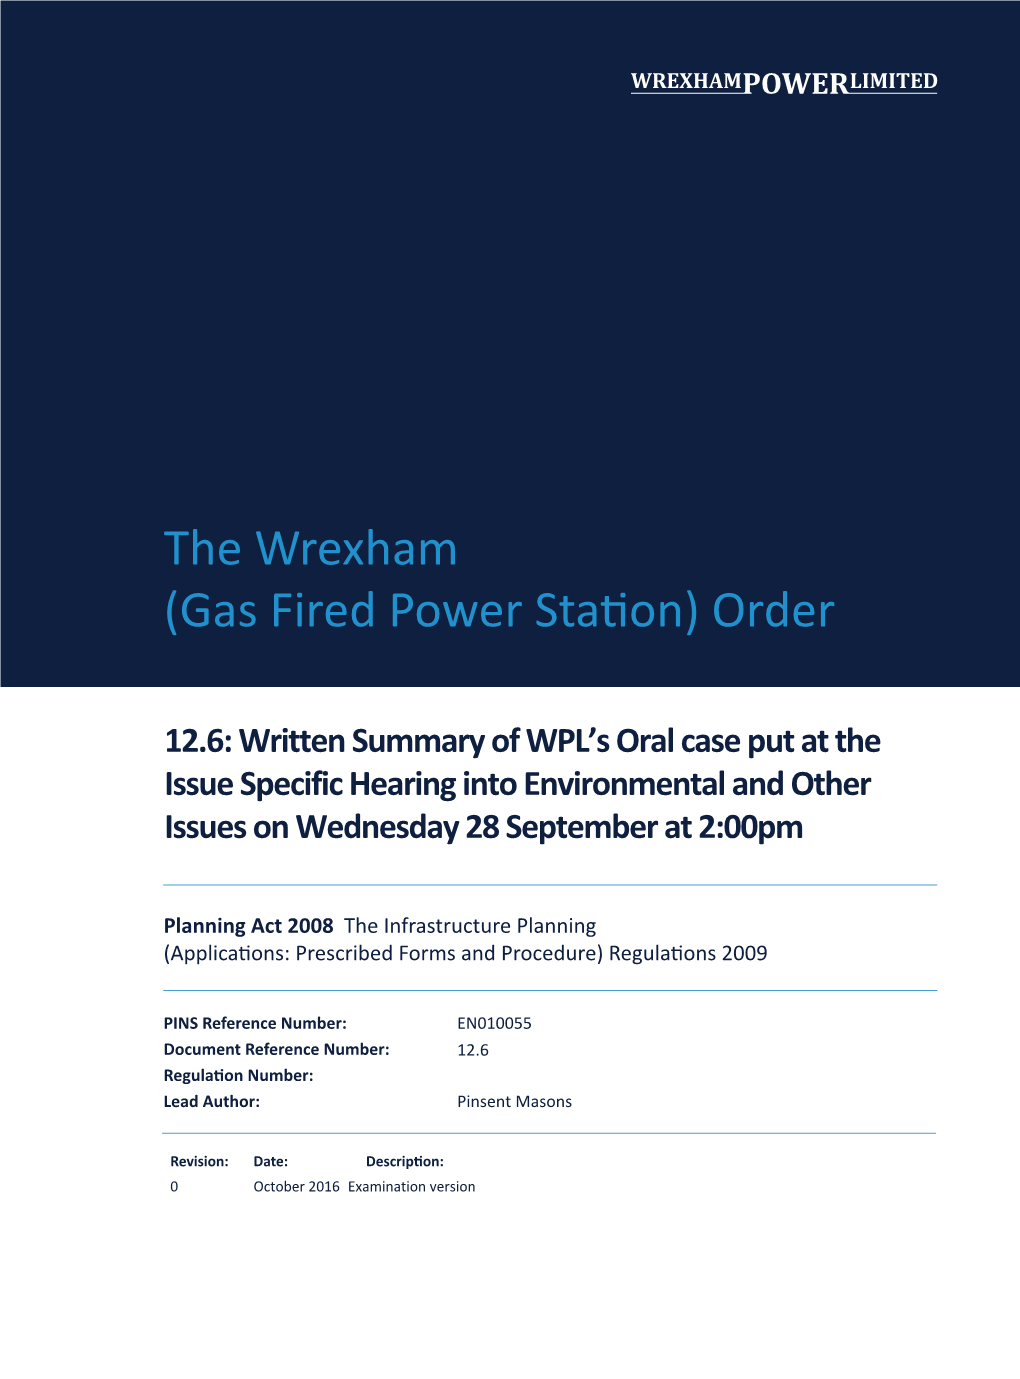 The Wrexham (Gas Fired Power Station) Order